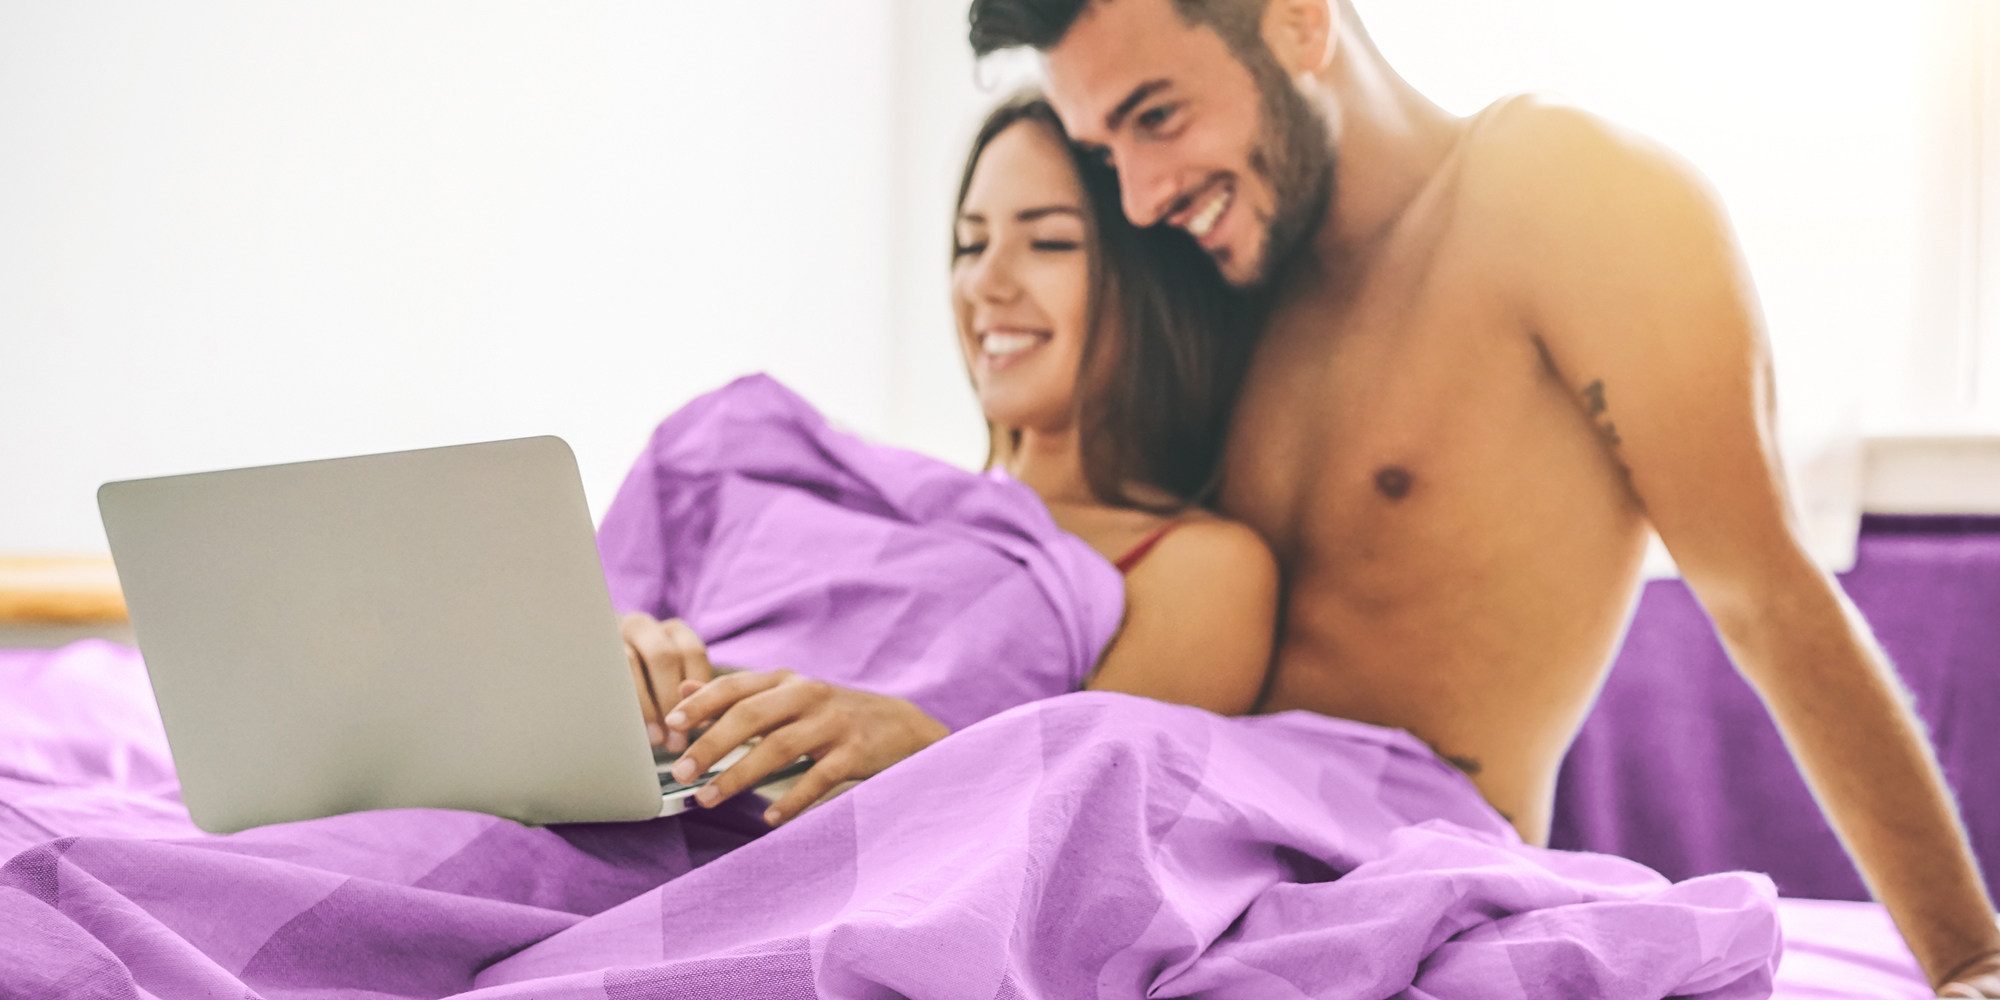 Missy Martinezs Guide To Watching Porn With Your Partner pic